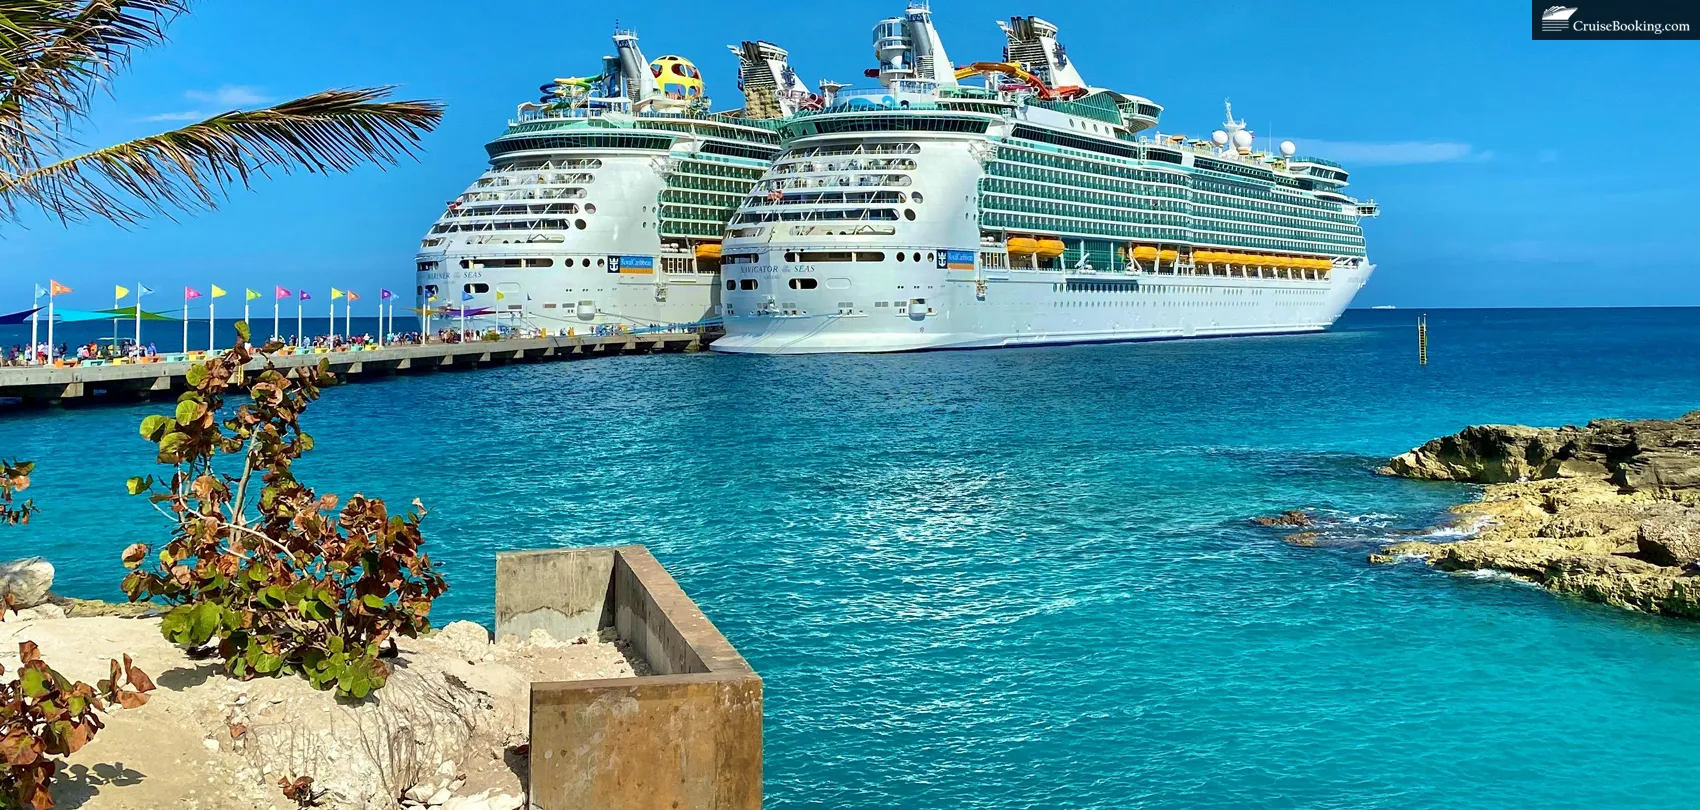 Carnival and Royal Caribbean are on port